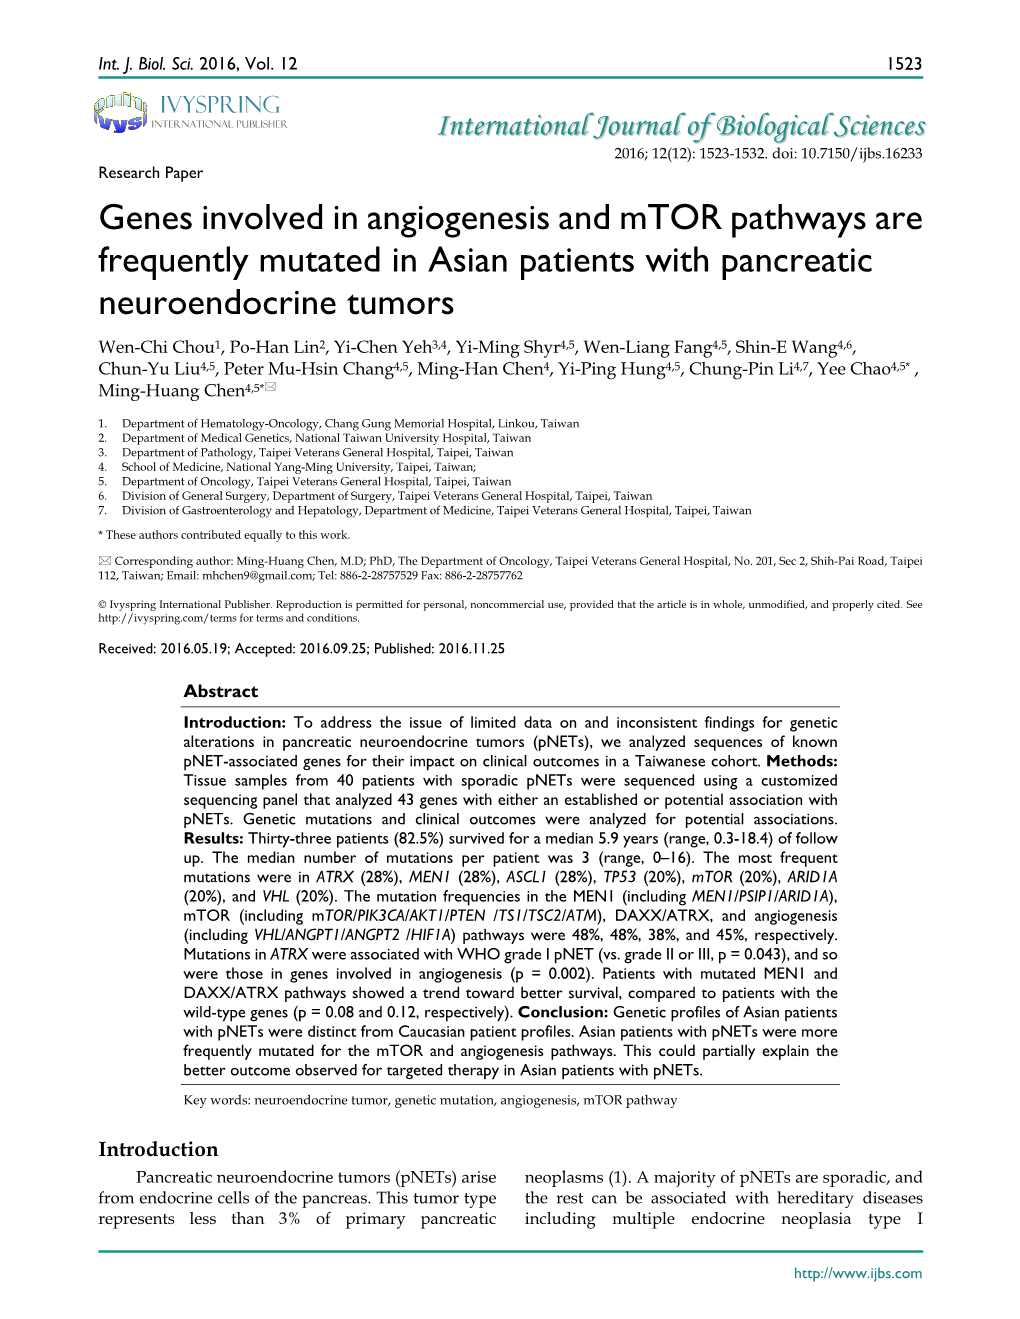 Genes Involved in Angiogenesis and Mtor Pathways Are Frequently